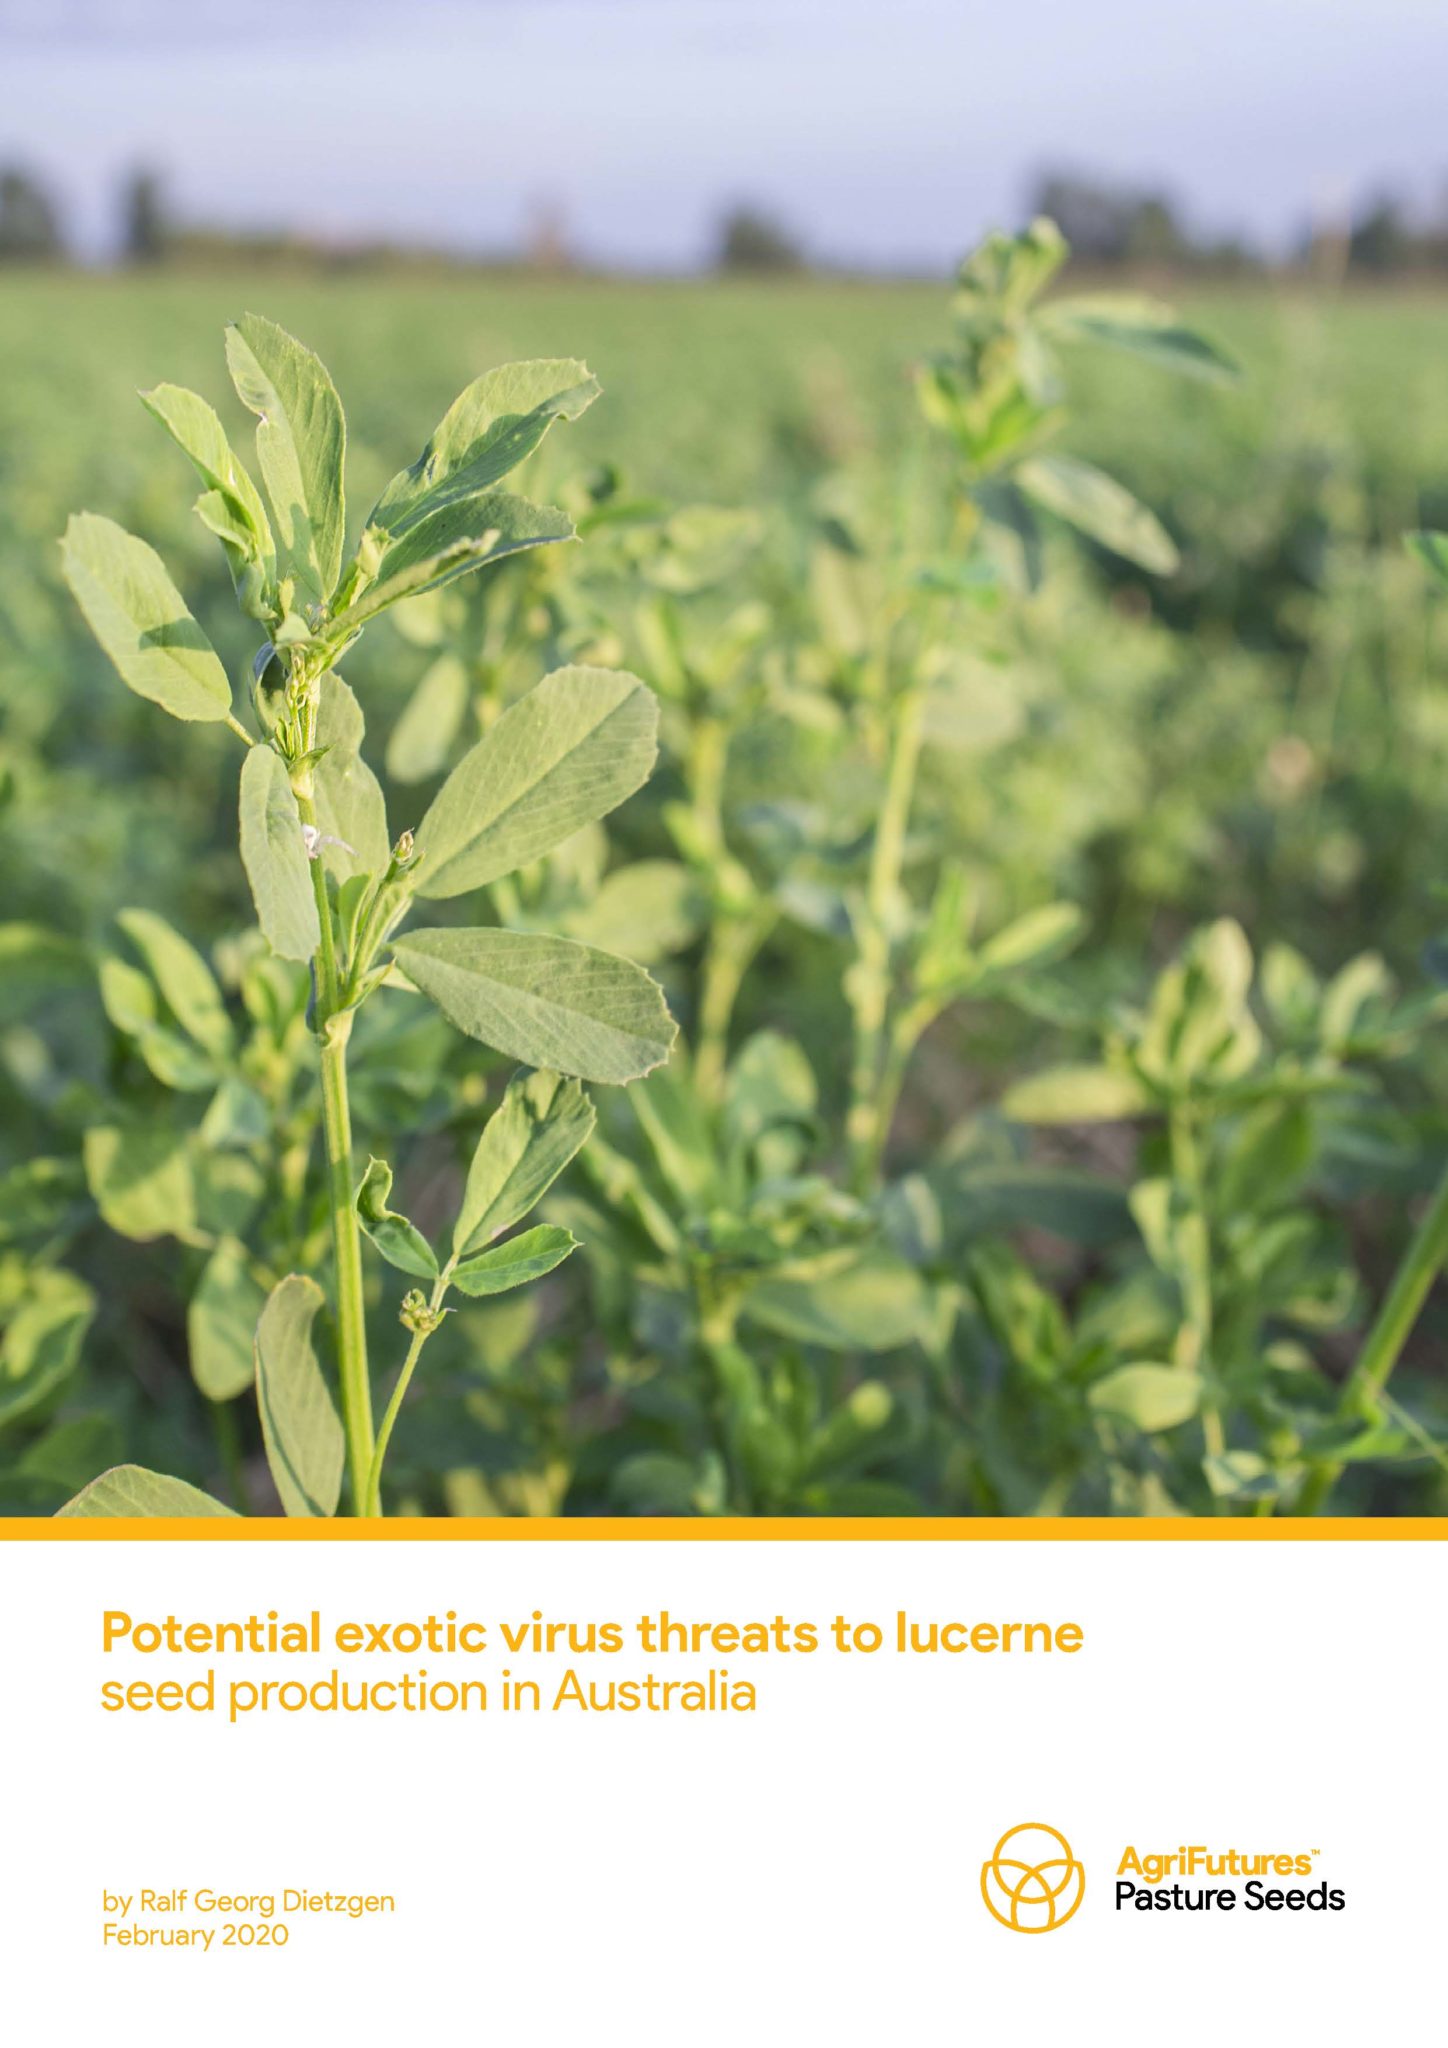 Potential exotic virus threats to lucerne seed production in Australia - image